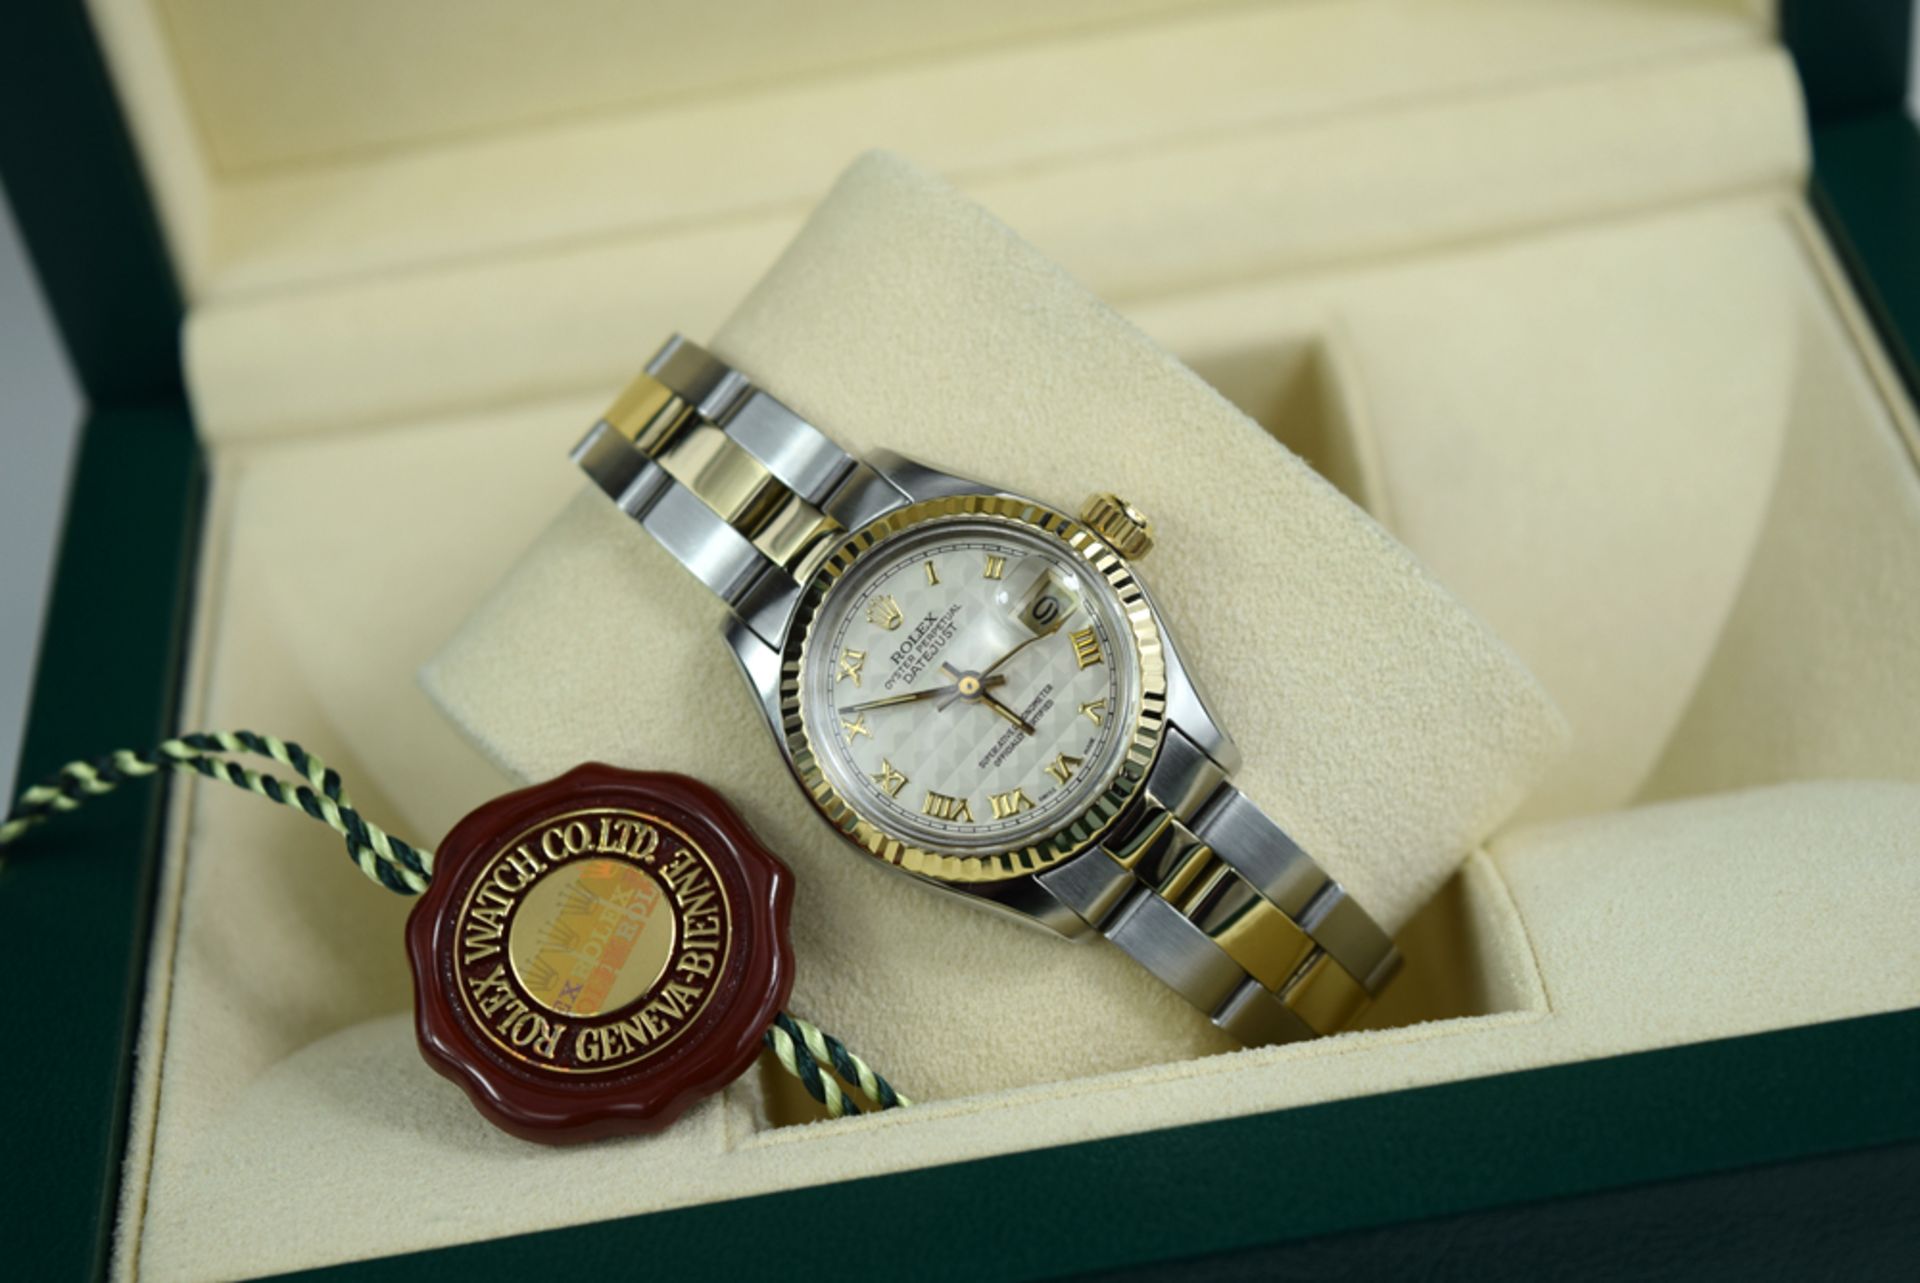 ROLEX - GOLD & STEEL LADY DATEJUST with CREAM PYRAMID Dial - Looks Incredible!!! - Image 10 of 12